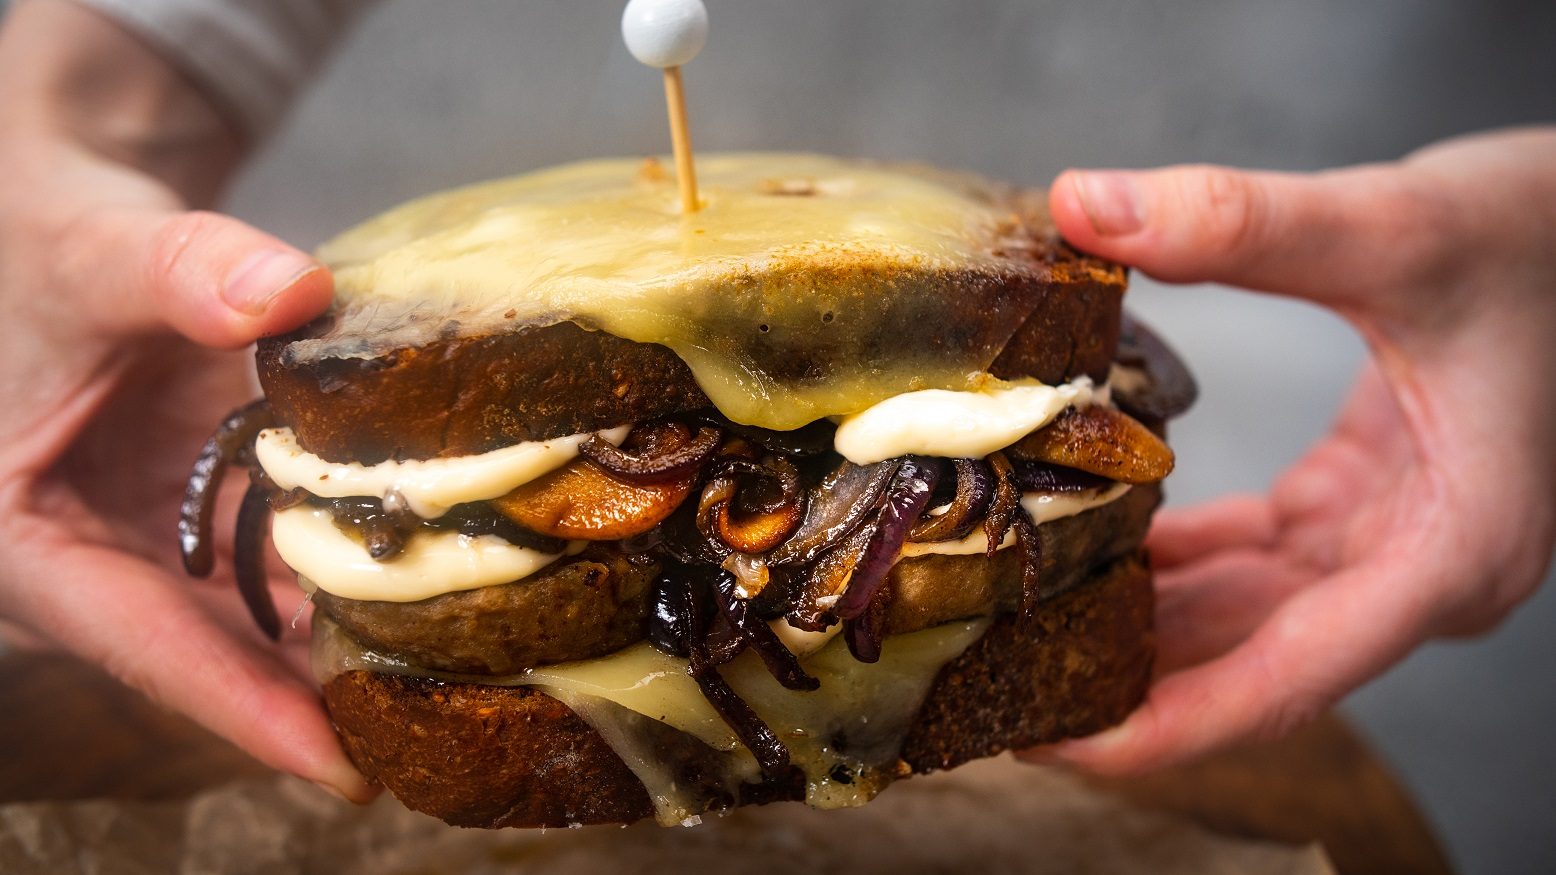 Hands holding a burger melt with mushrooms and melted cheese.